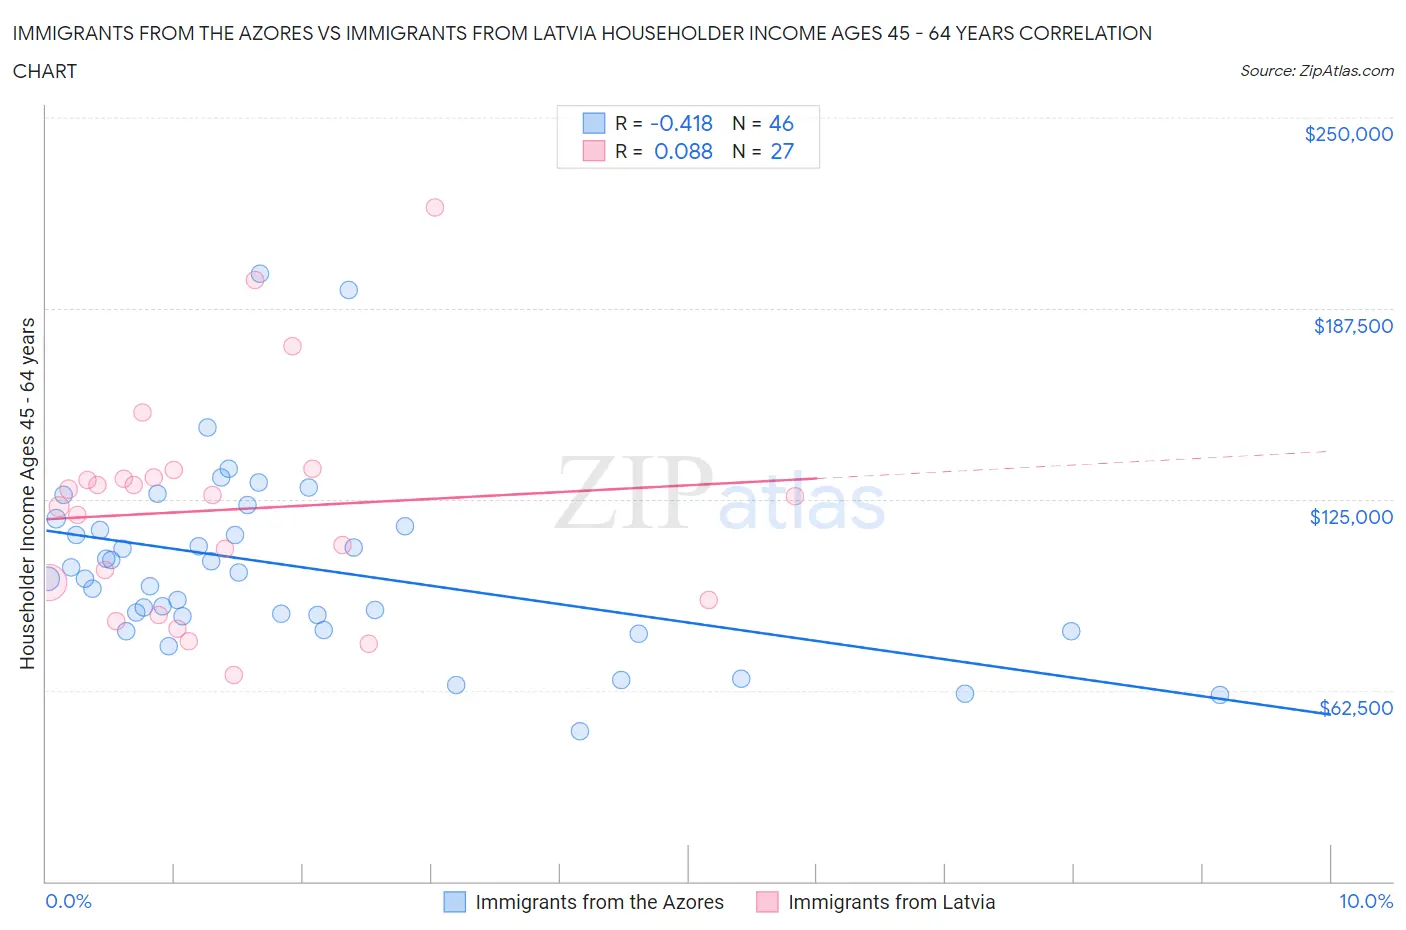 Immigrants from the Azores vs Immigrants from Latvia Householder Income Ages 45 - 64 years